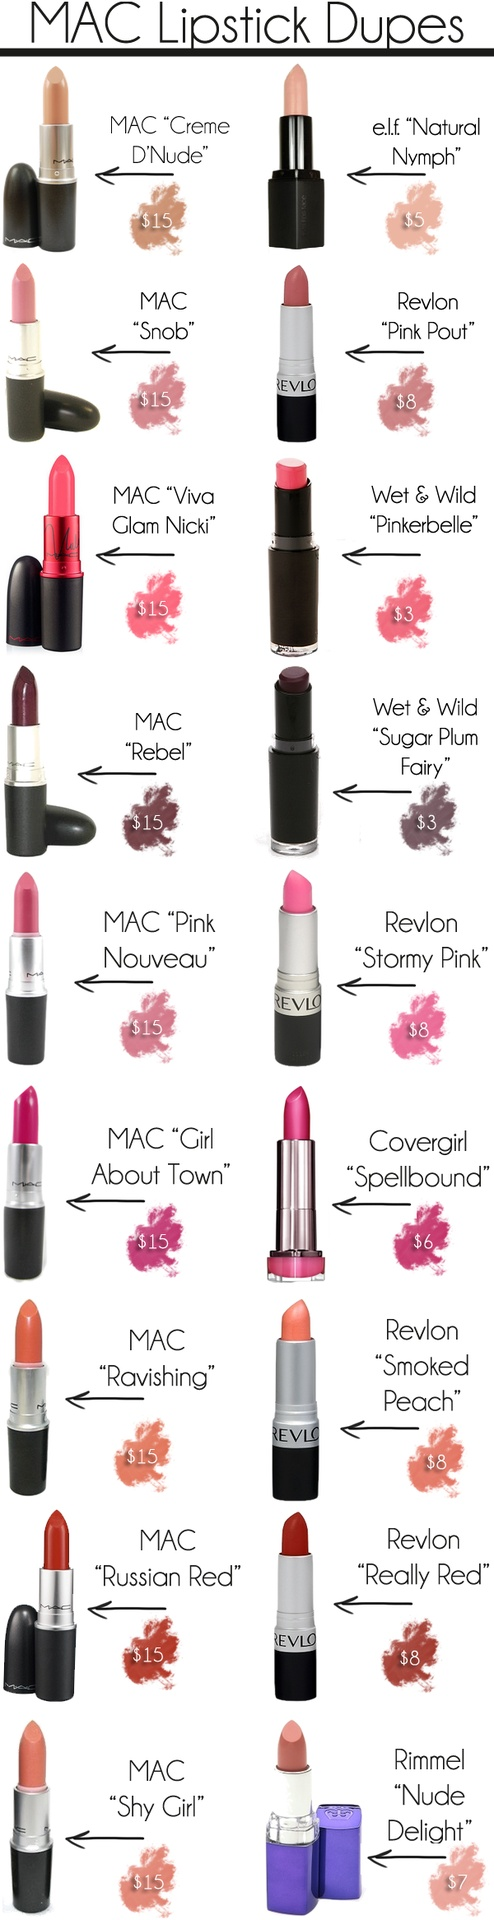 Mac cheats! Lipstick for less  wow – this is amazing.  I want to see more dups!